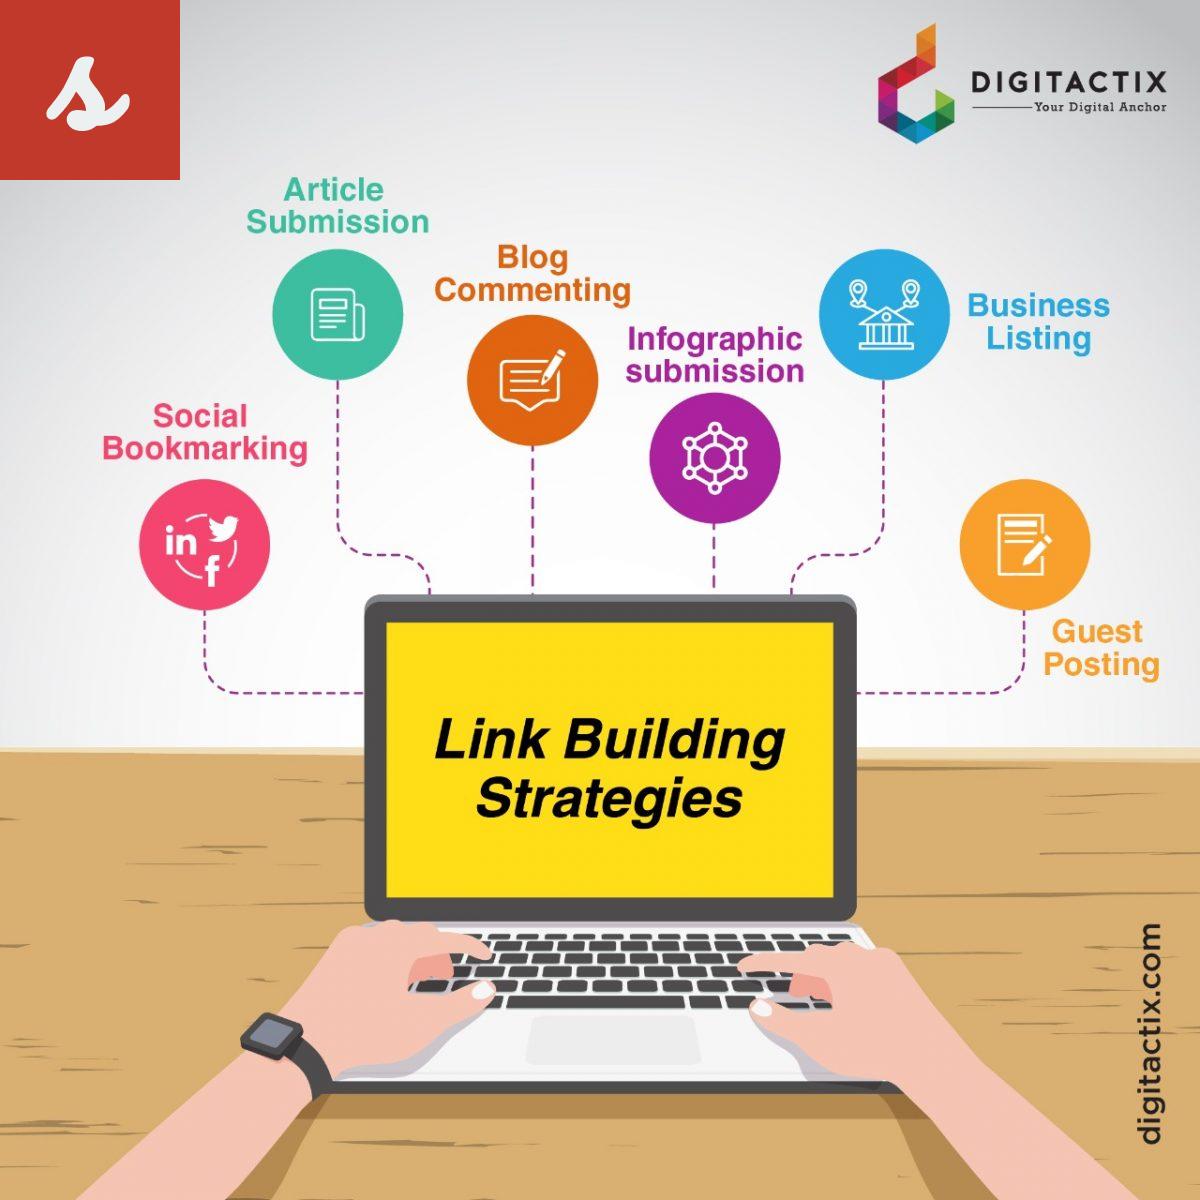 Link Building Techniques to Improve Your SEO
